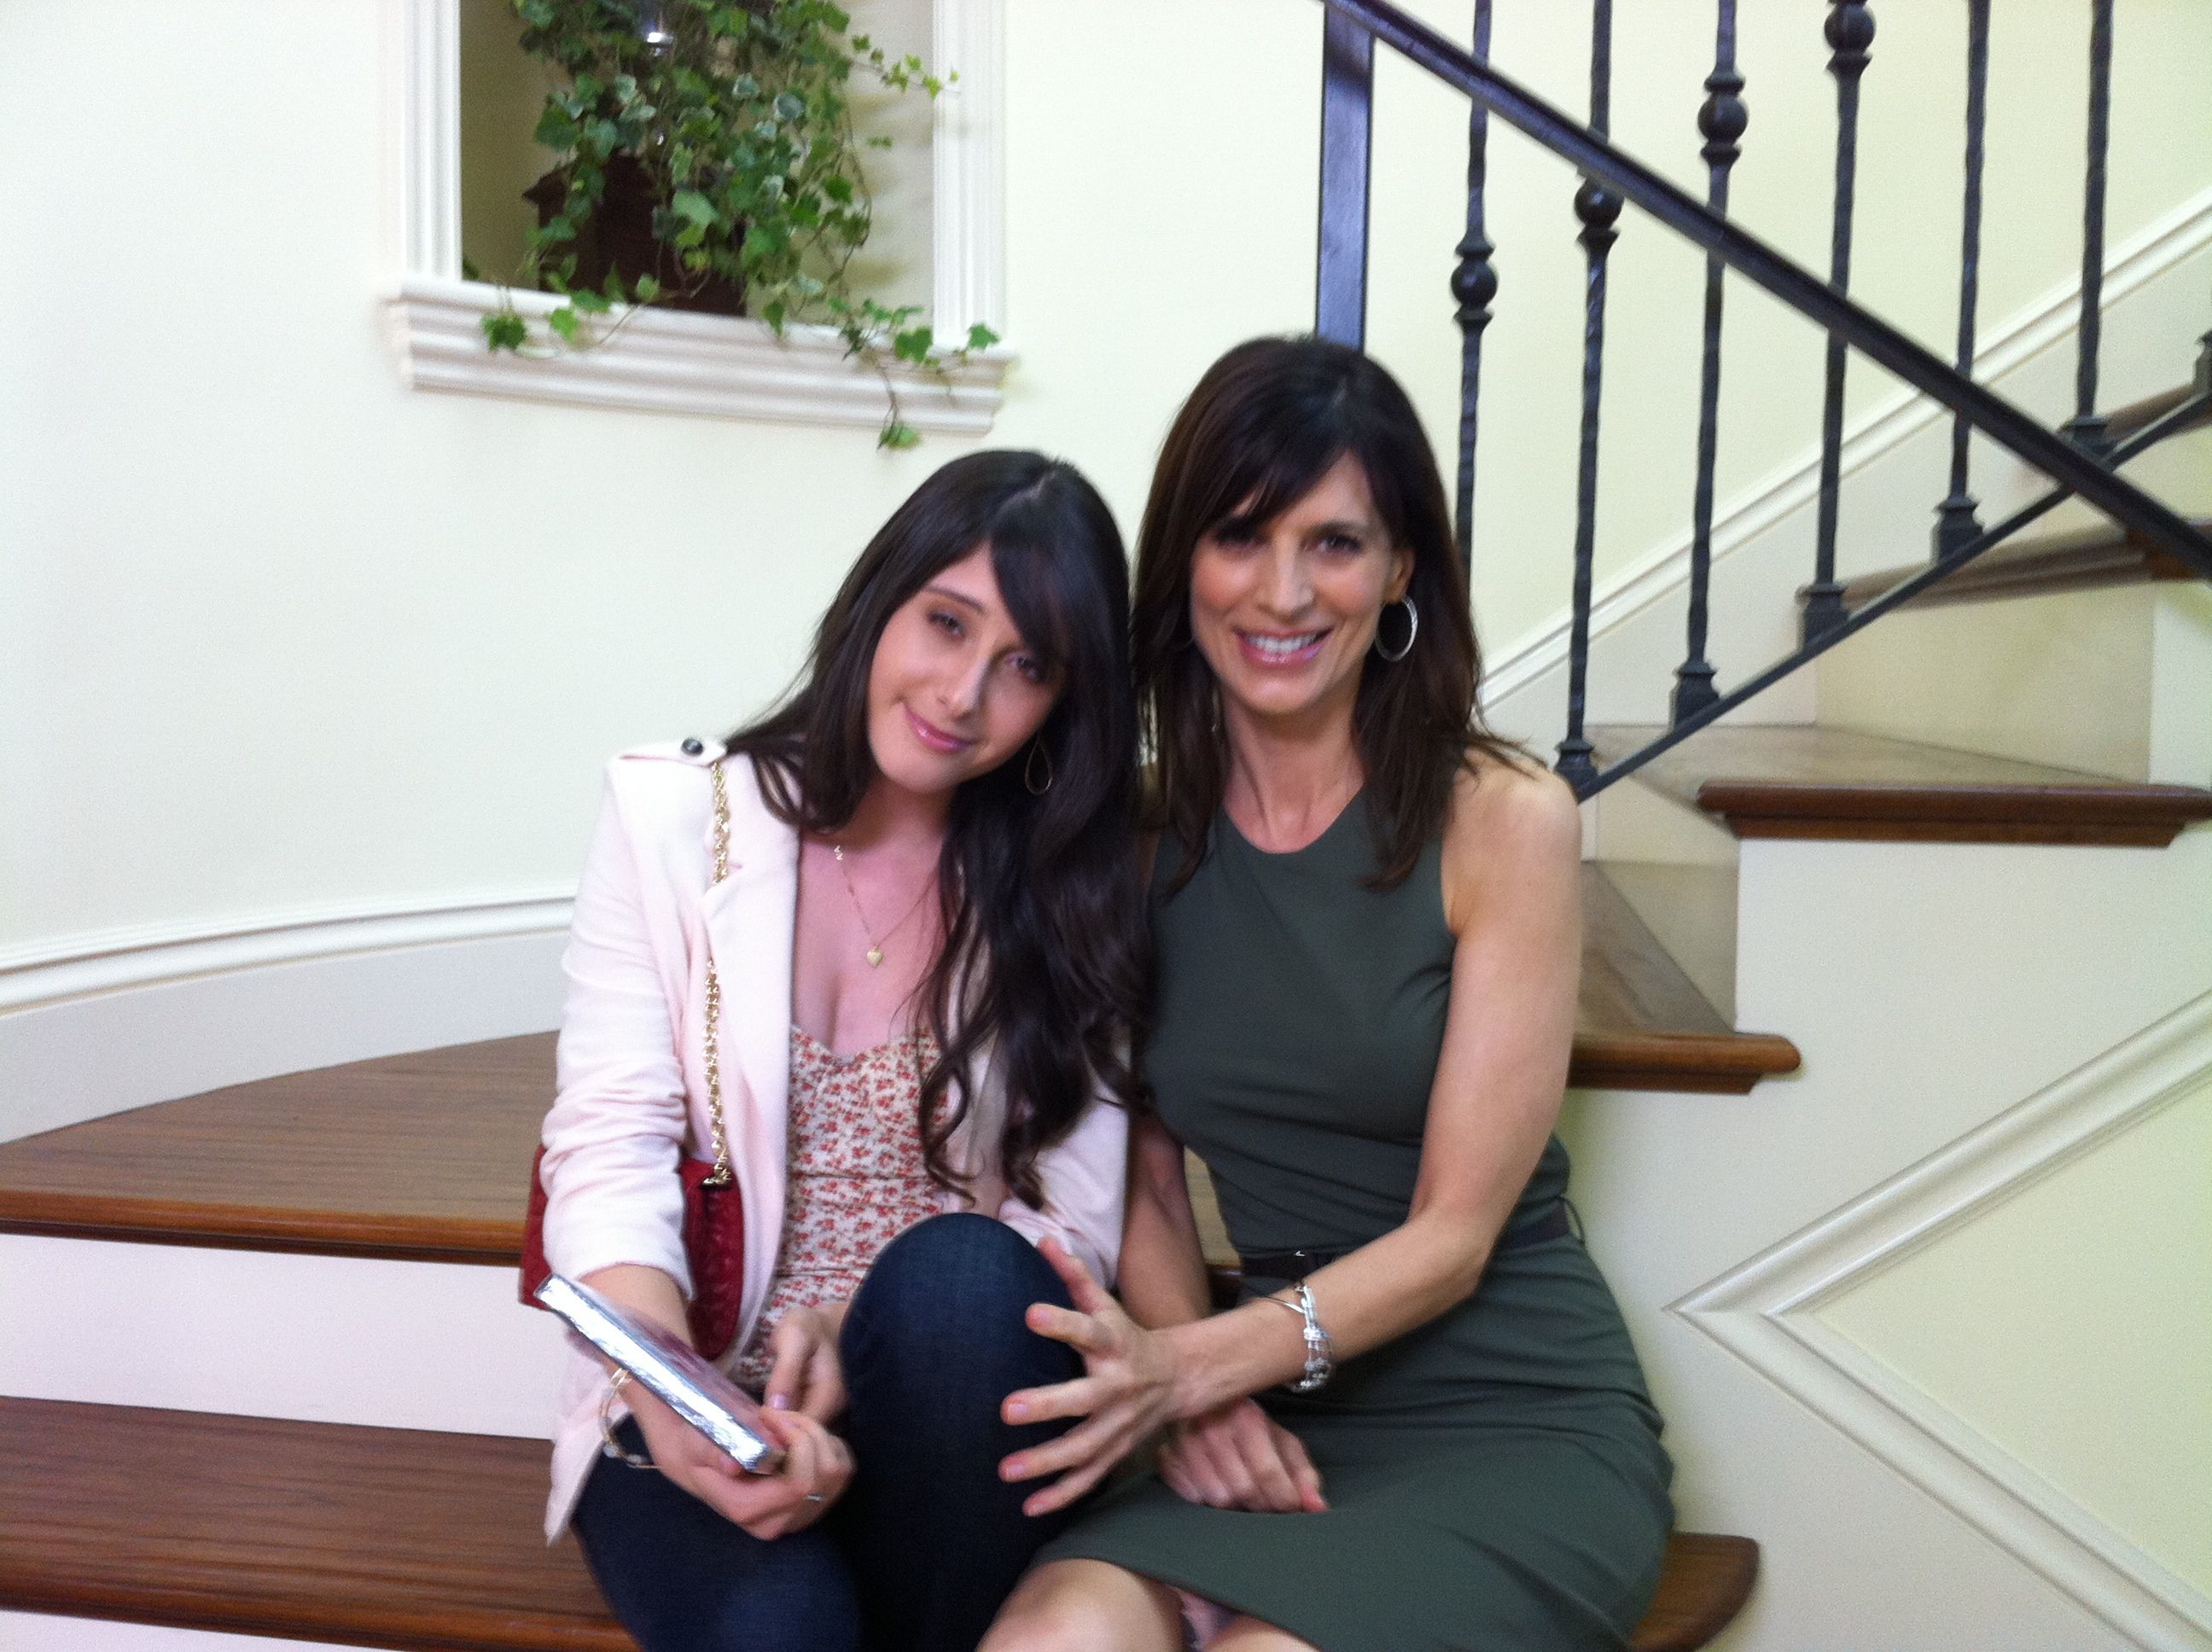 Cassidy Lehrman with Perrey Reeves